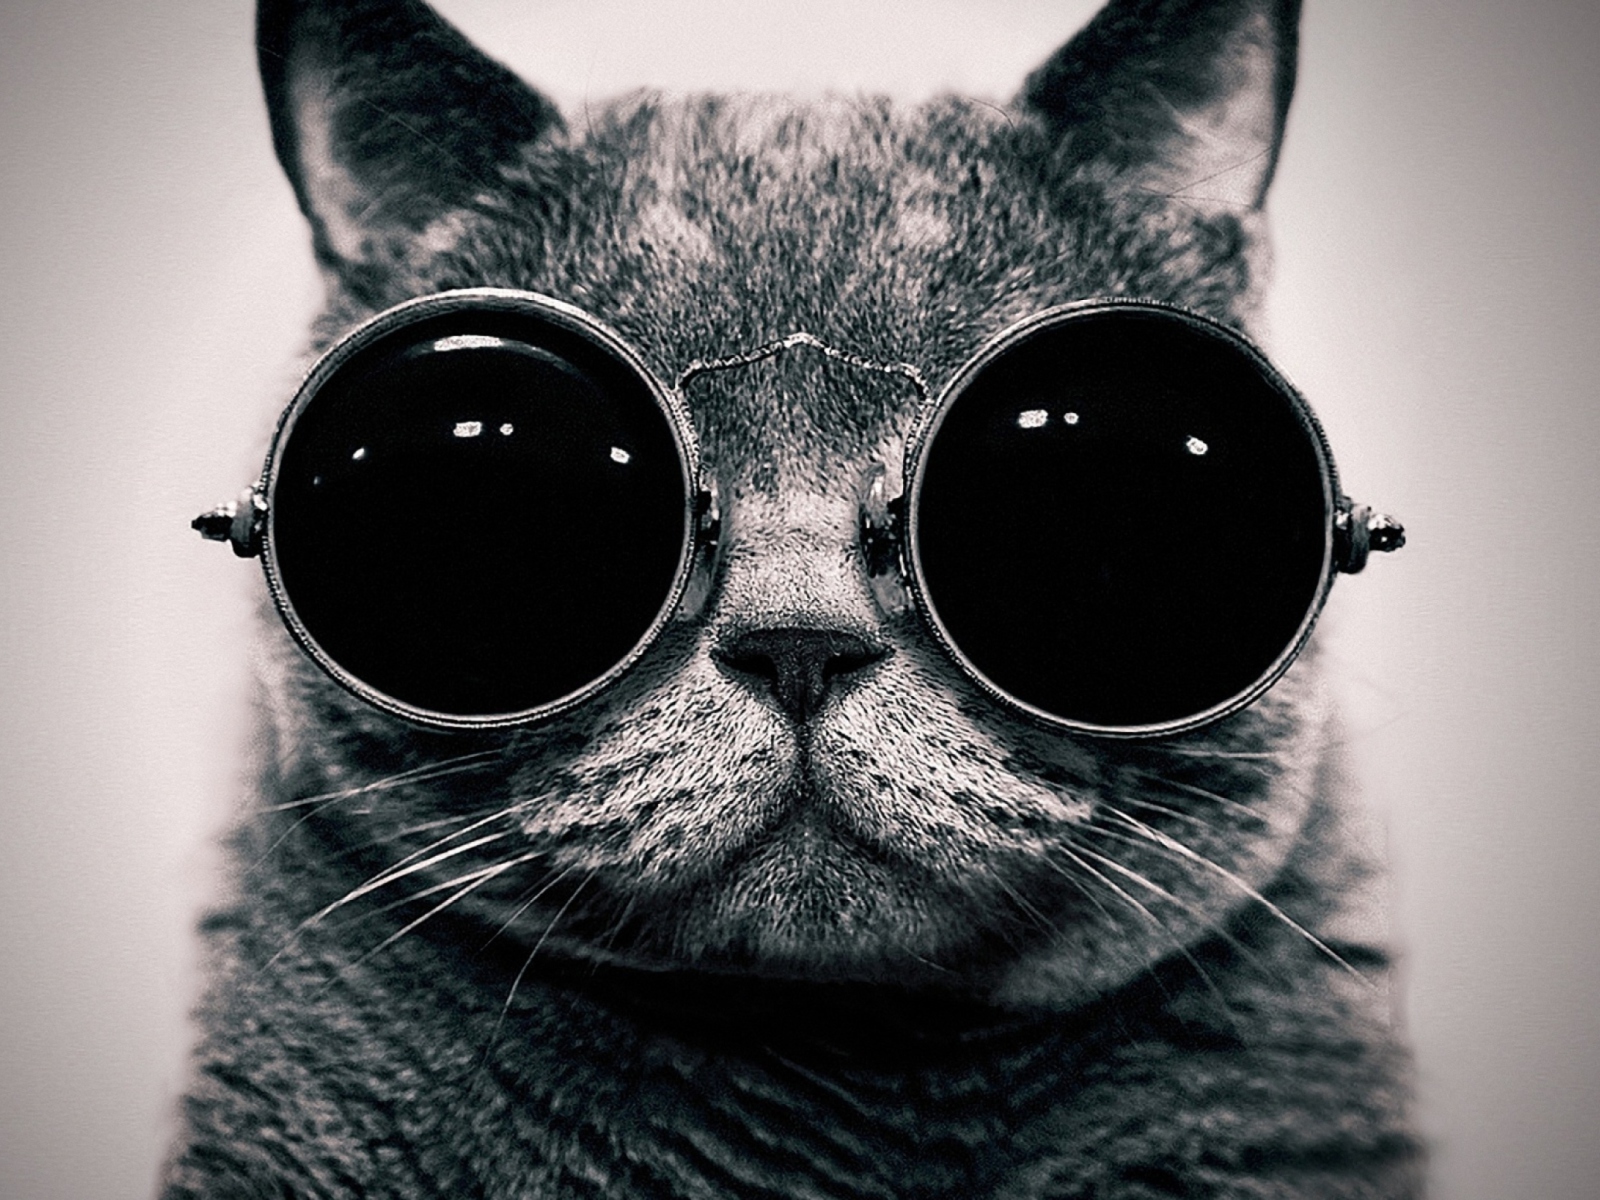 Cat With Glasses wallpaper 1600x1200